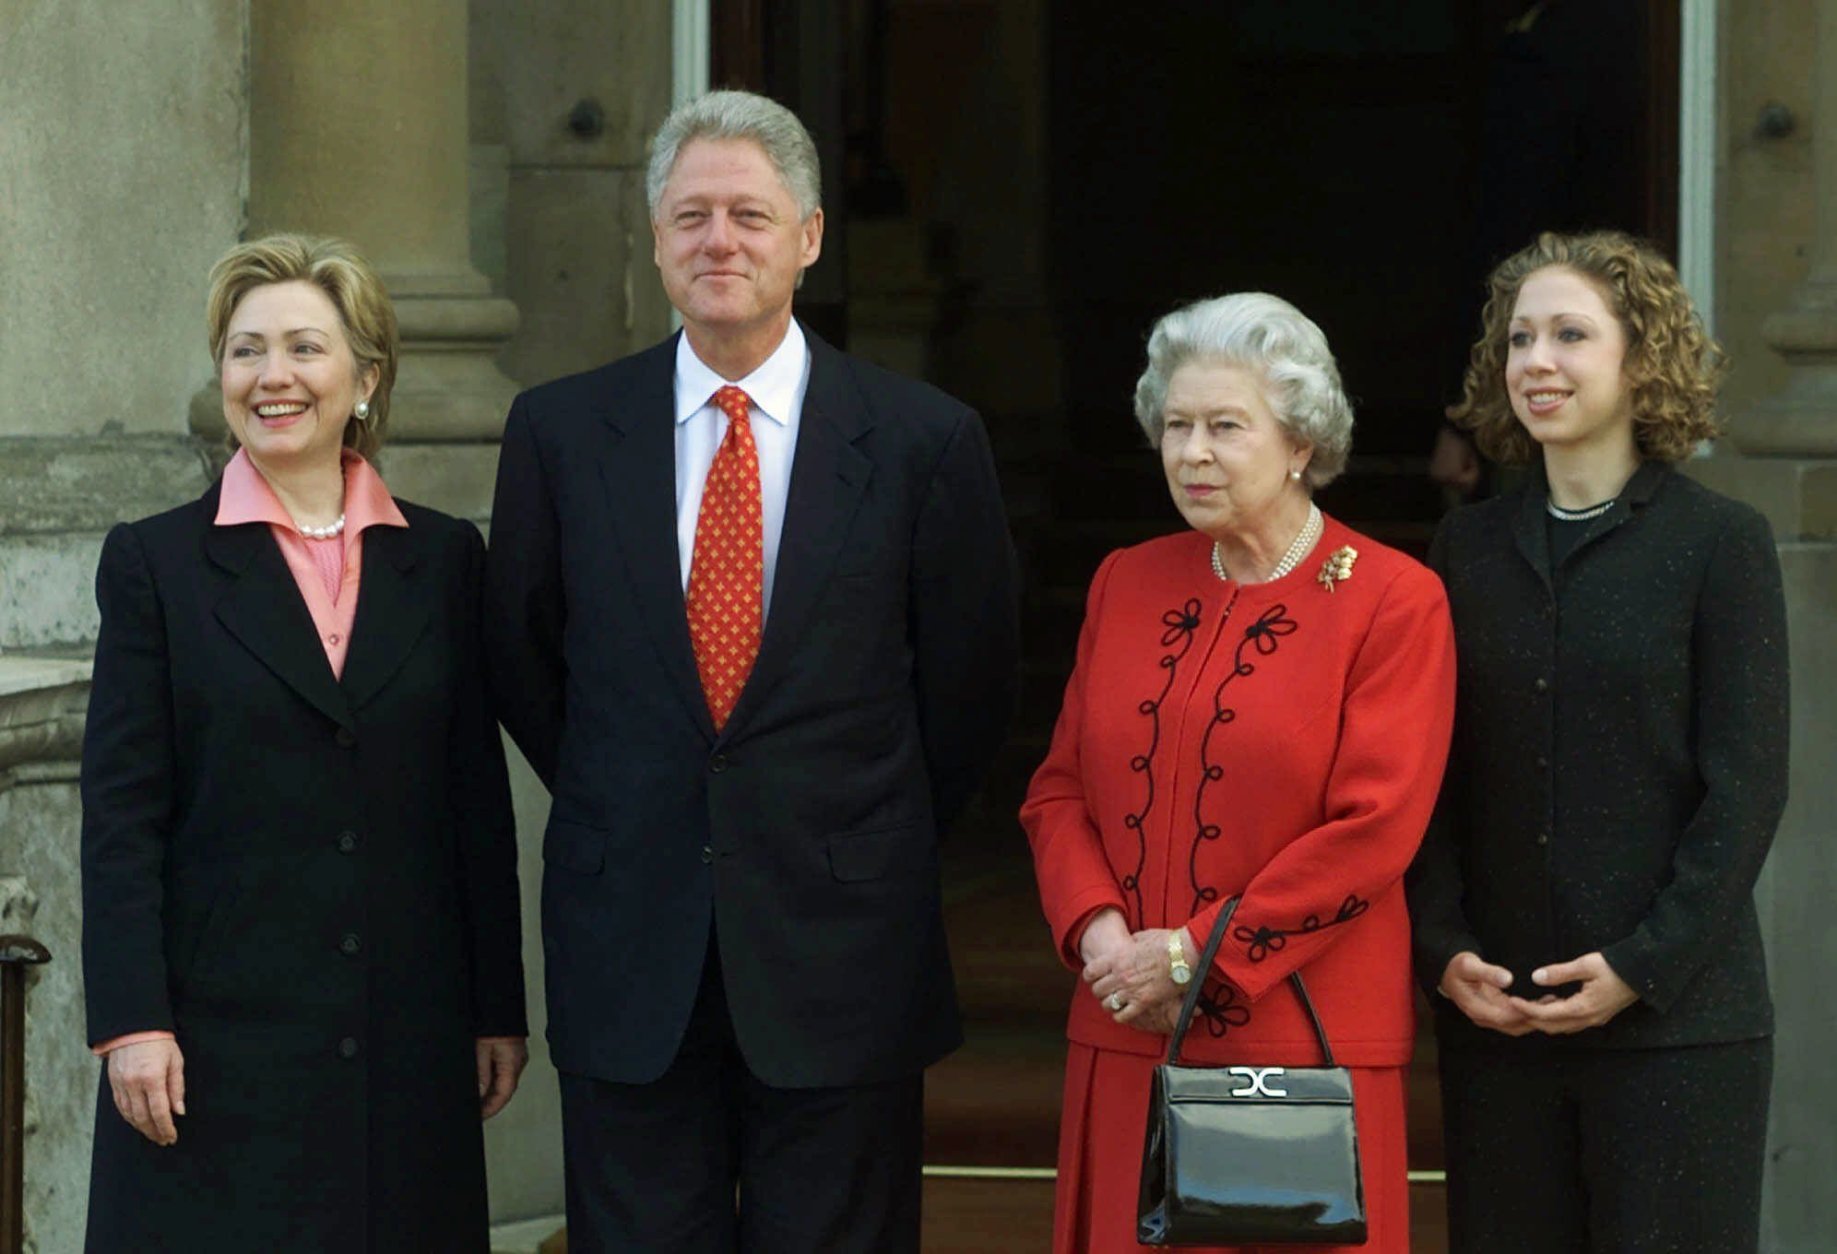 U.S. President Bill Clinton, Britain's Queen Elizabeth II, first lady Hillary Rodham Clinton, left, and Clinton's daughter Chelsea, right, stand for photographers outside Buckingham Palace in London Thursday, December 14, 2000. Clinton met with the Queen on the final day of his three-day visit to Ireland, Northern Ireland and England.  (AP Photo/Ron Edmonds)